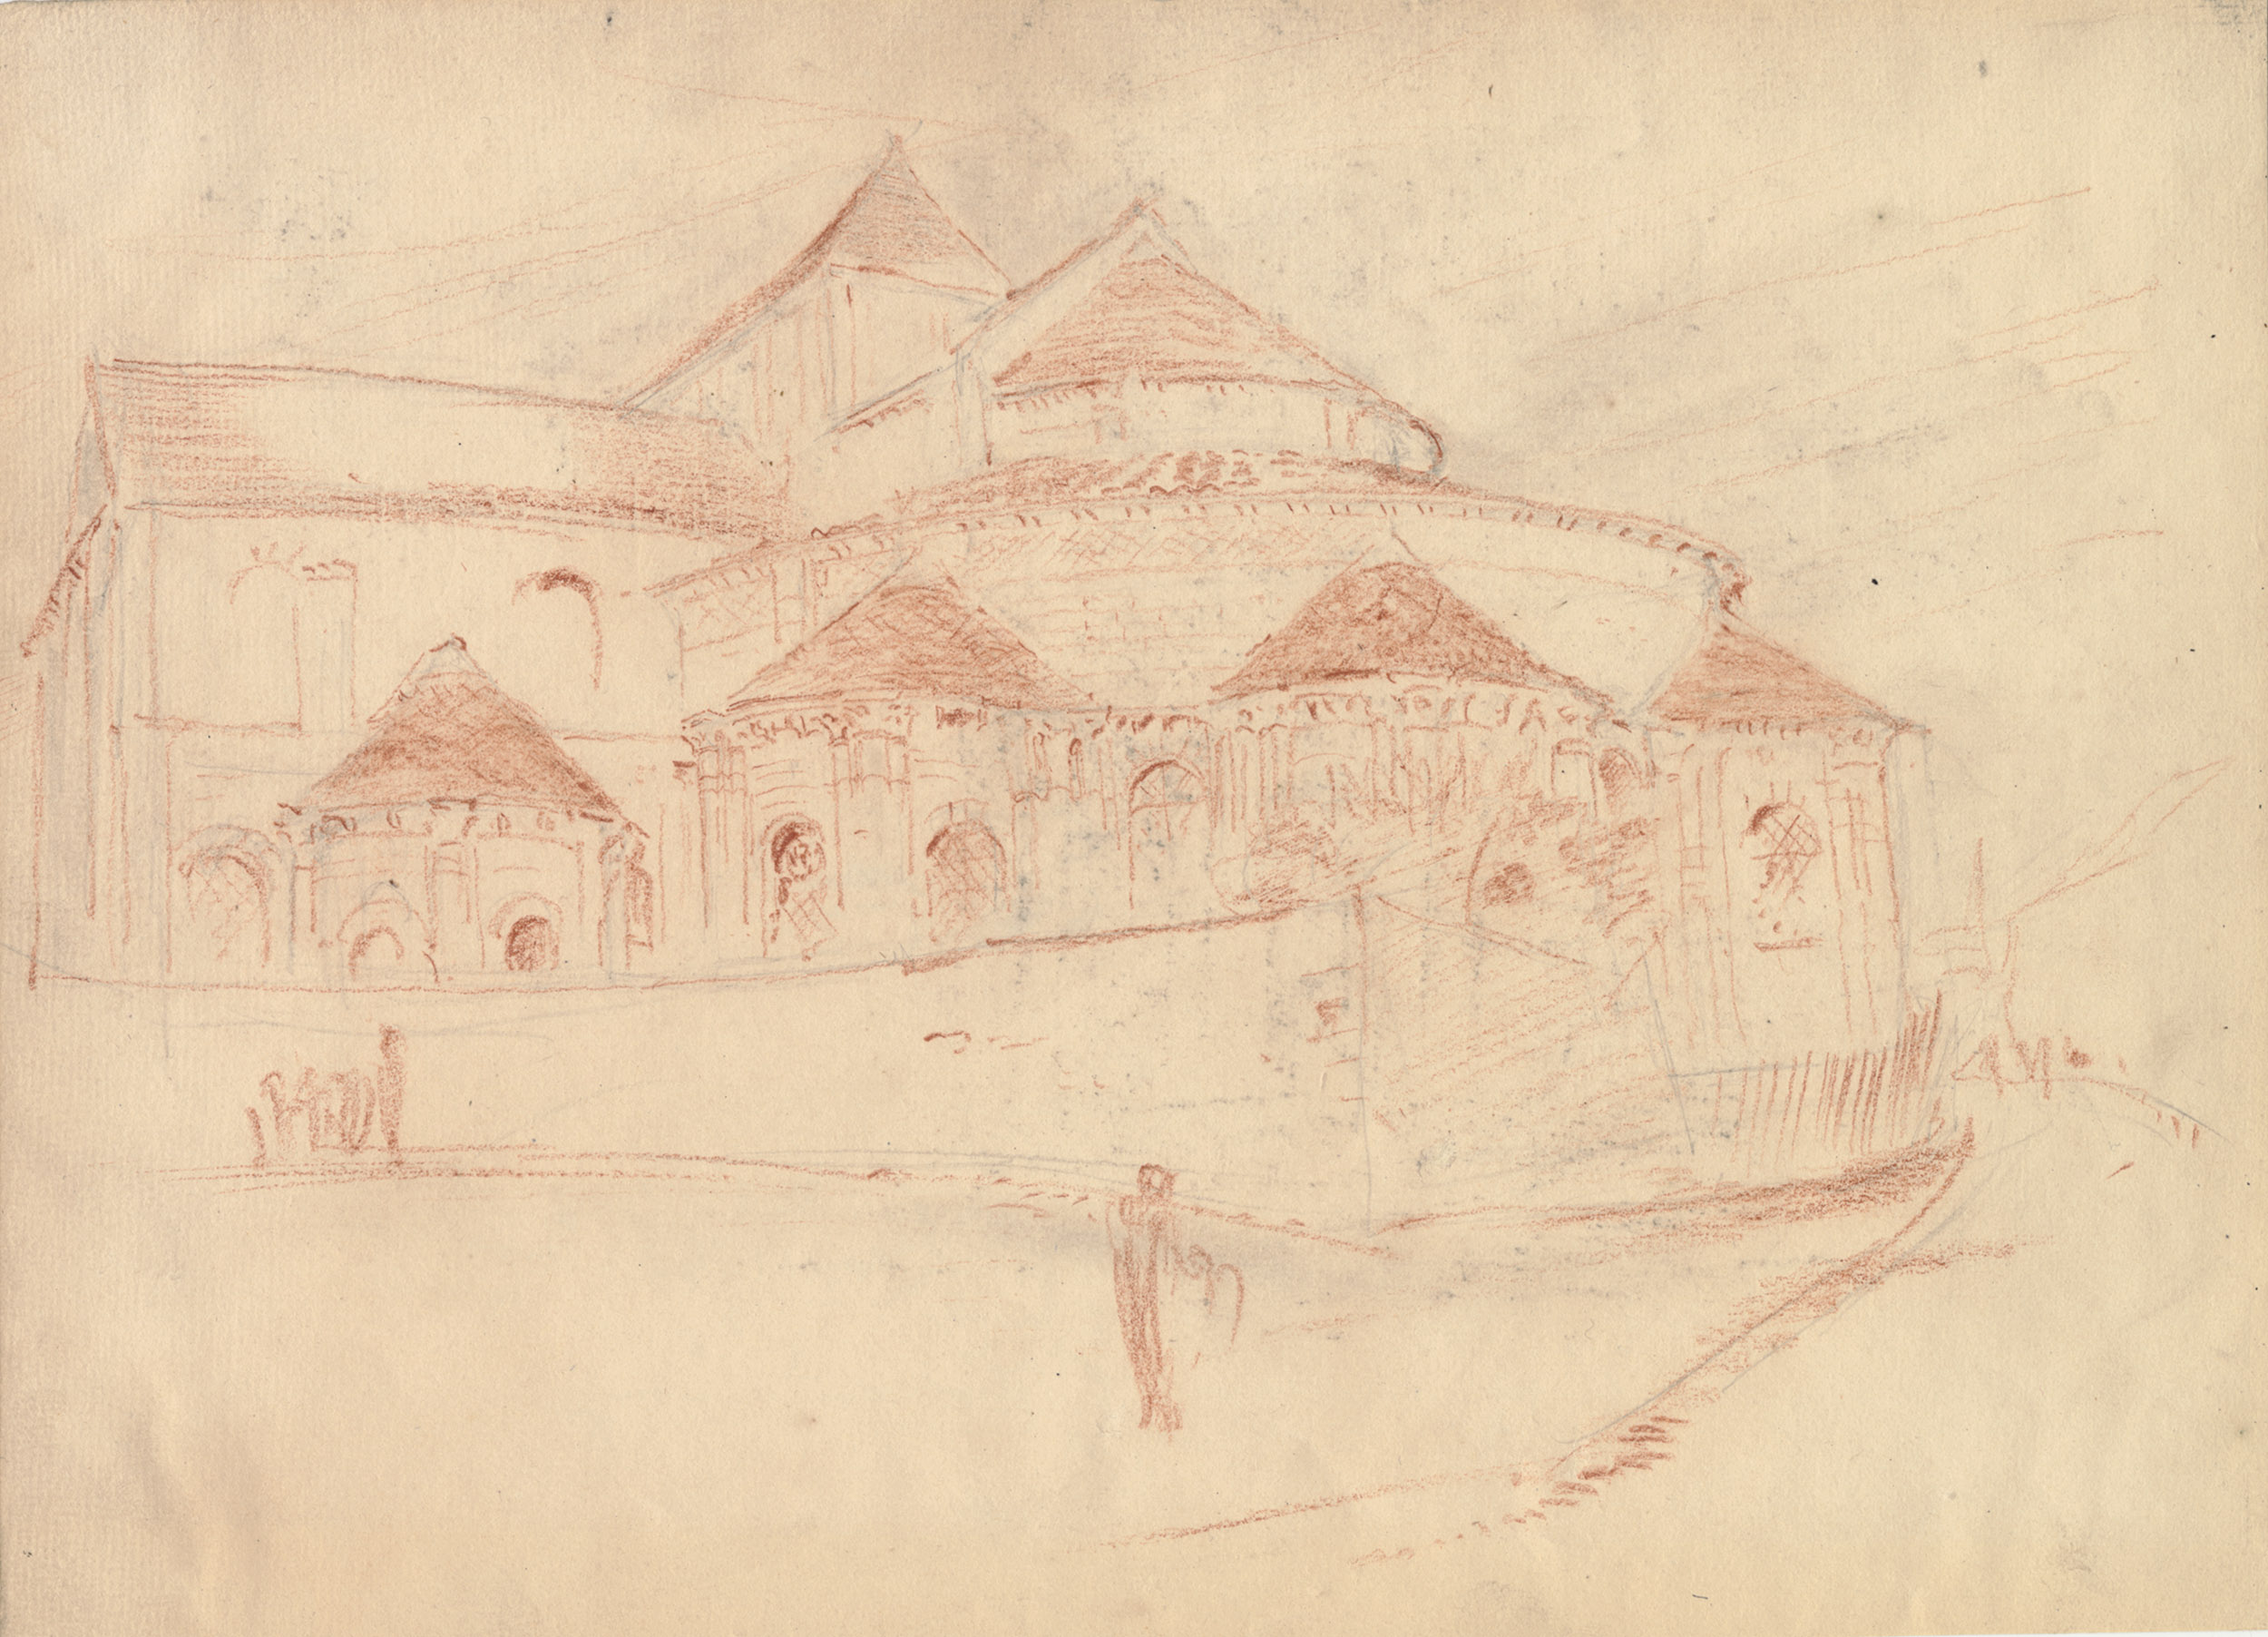 Sketch by Stamford White of a Romanesque Church apse